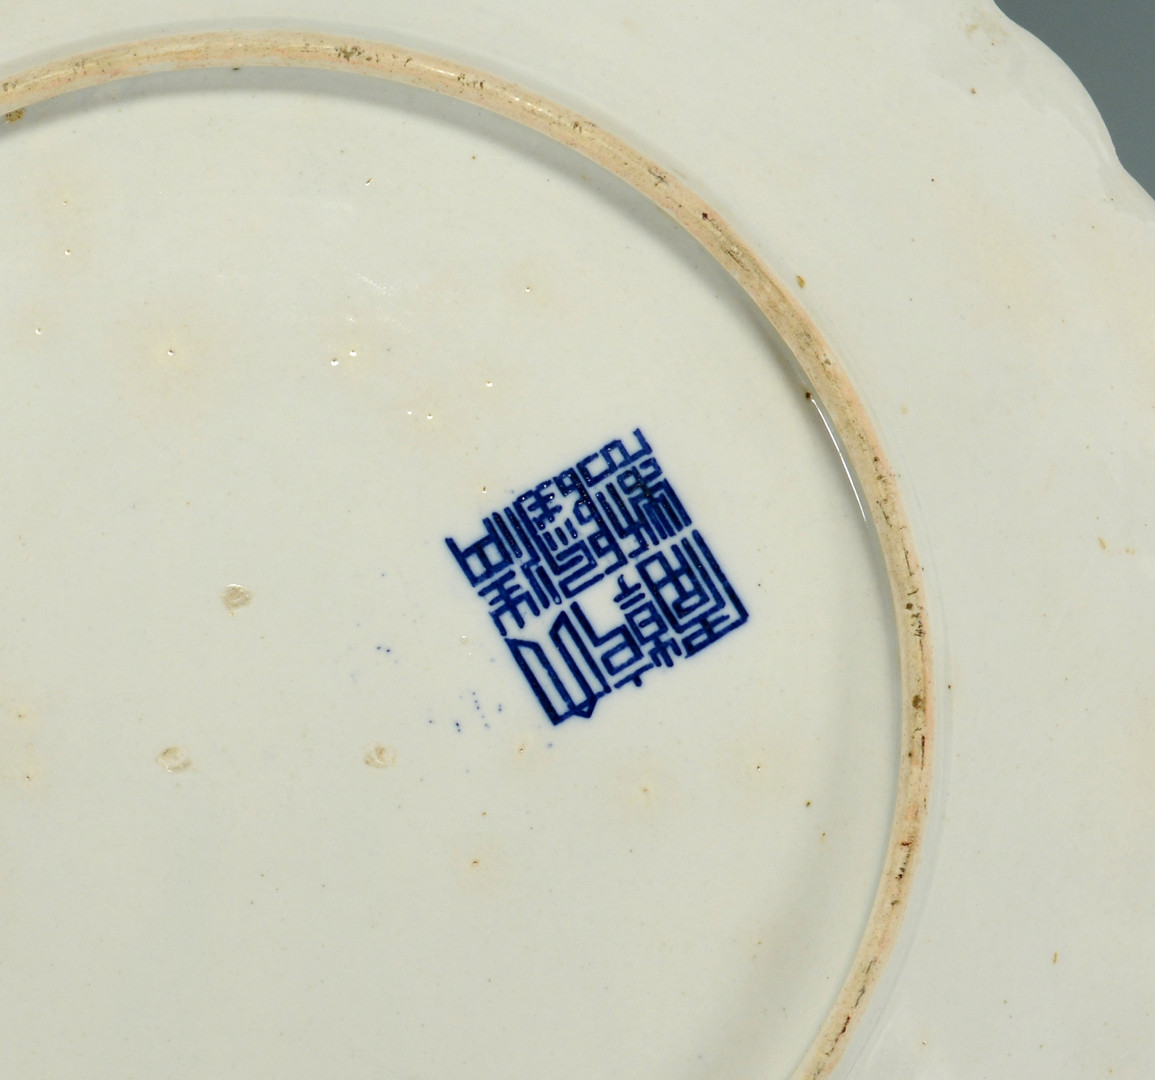 Lot 808: Large Chinese Famille Verte Porcelain Charger